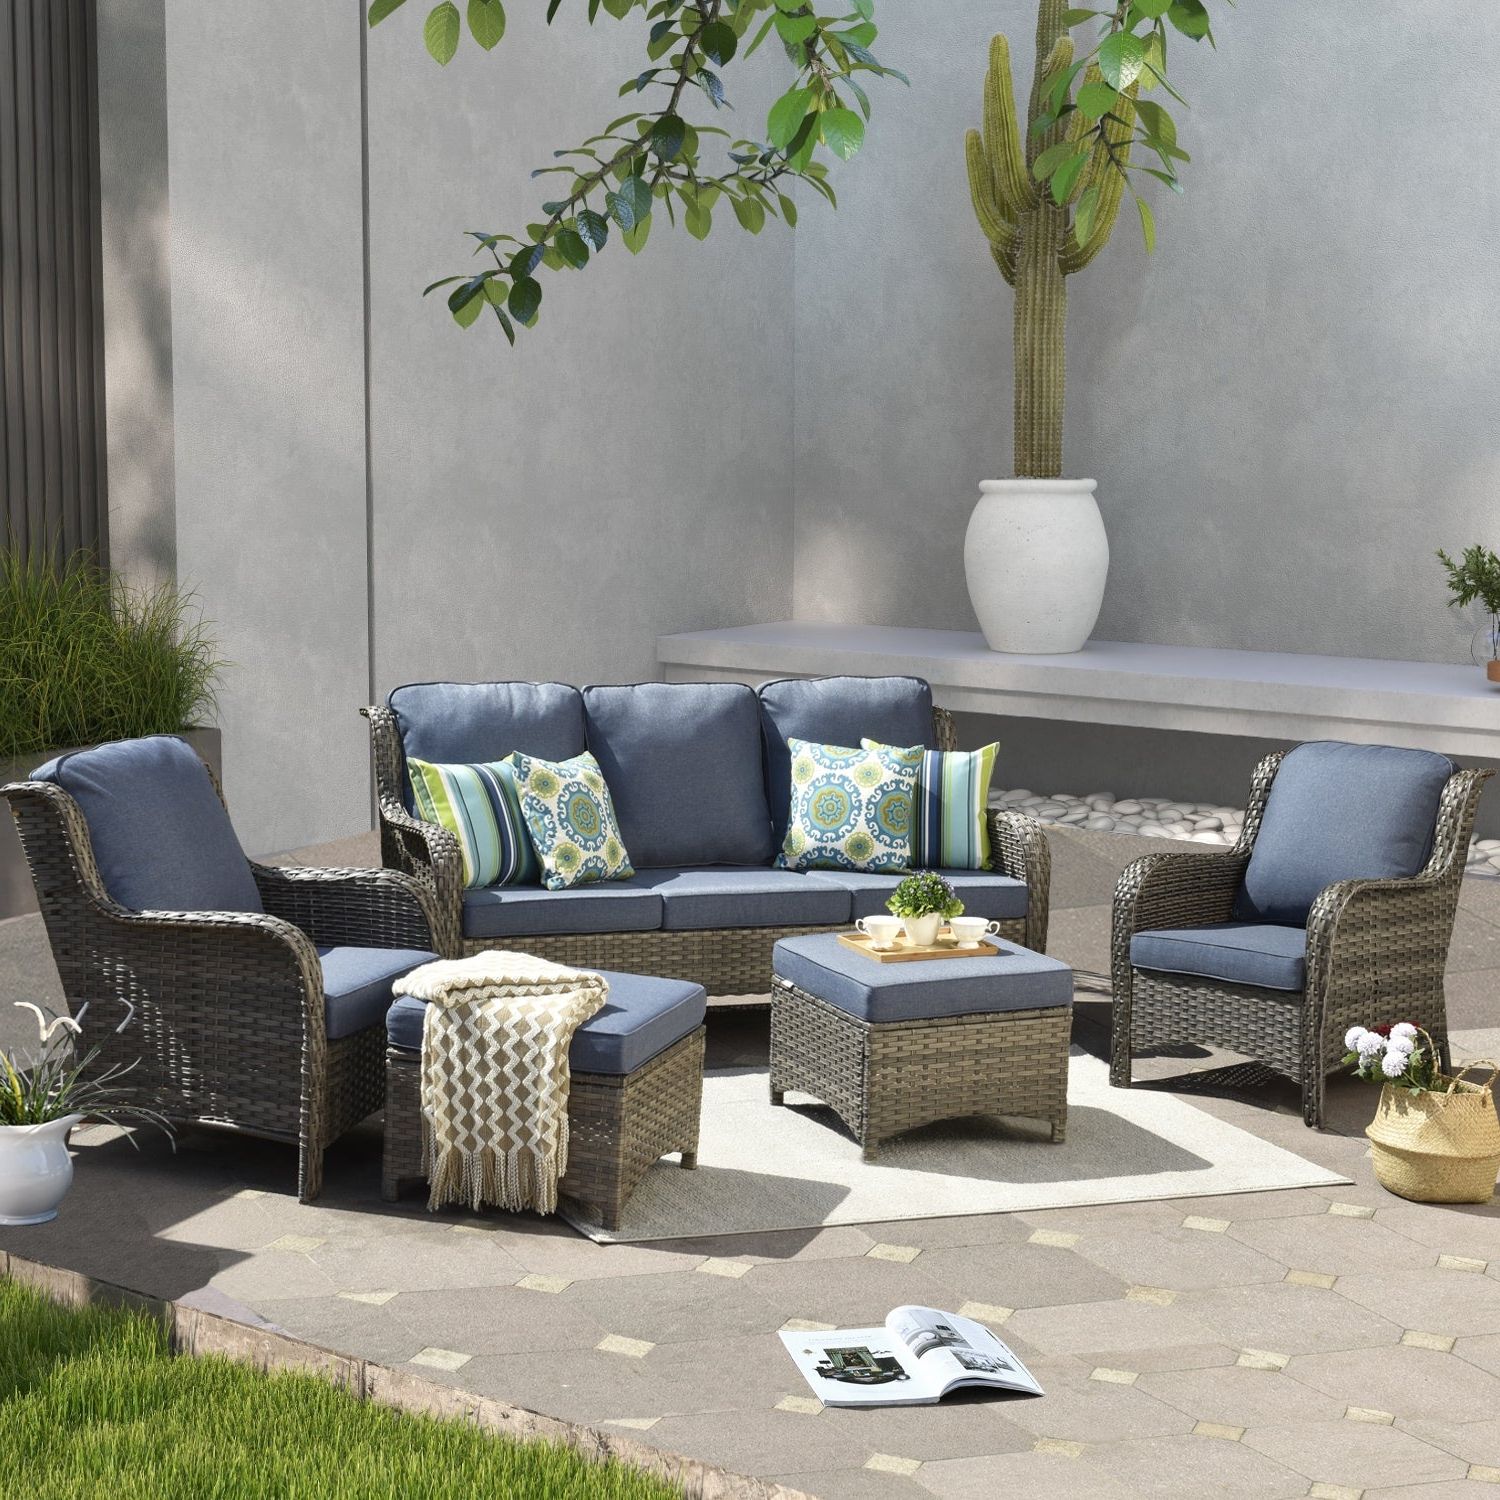 Ovios 5 Piece Patio Conversation Wicker Furniture Set – On Sale – – 31733697 With Recent All Weather Wicker Sectional Seating Group (View 13 of 15)